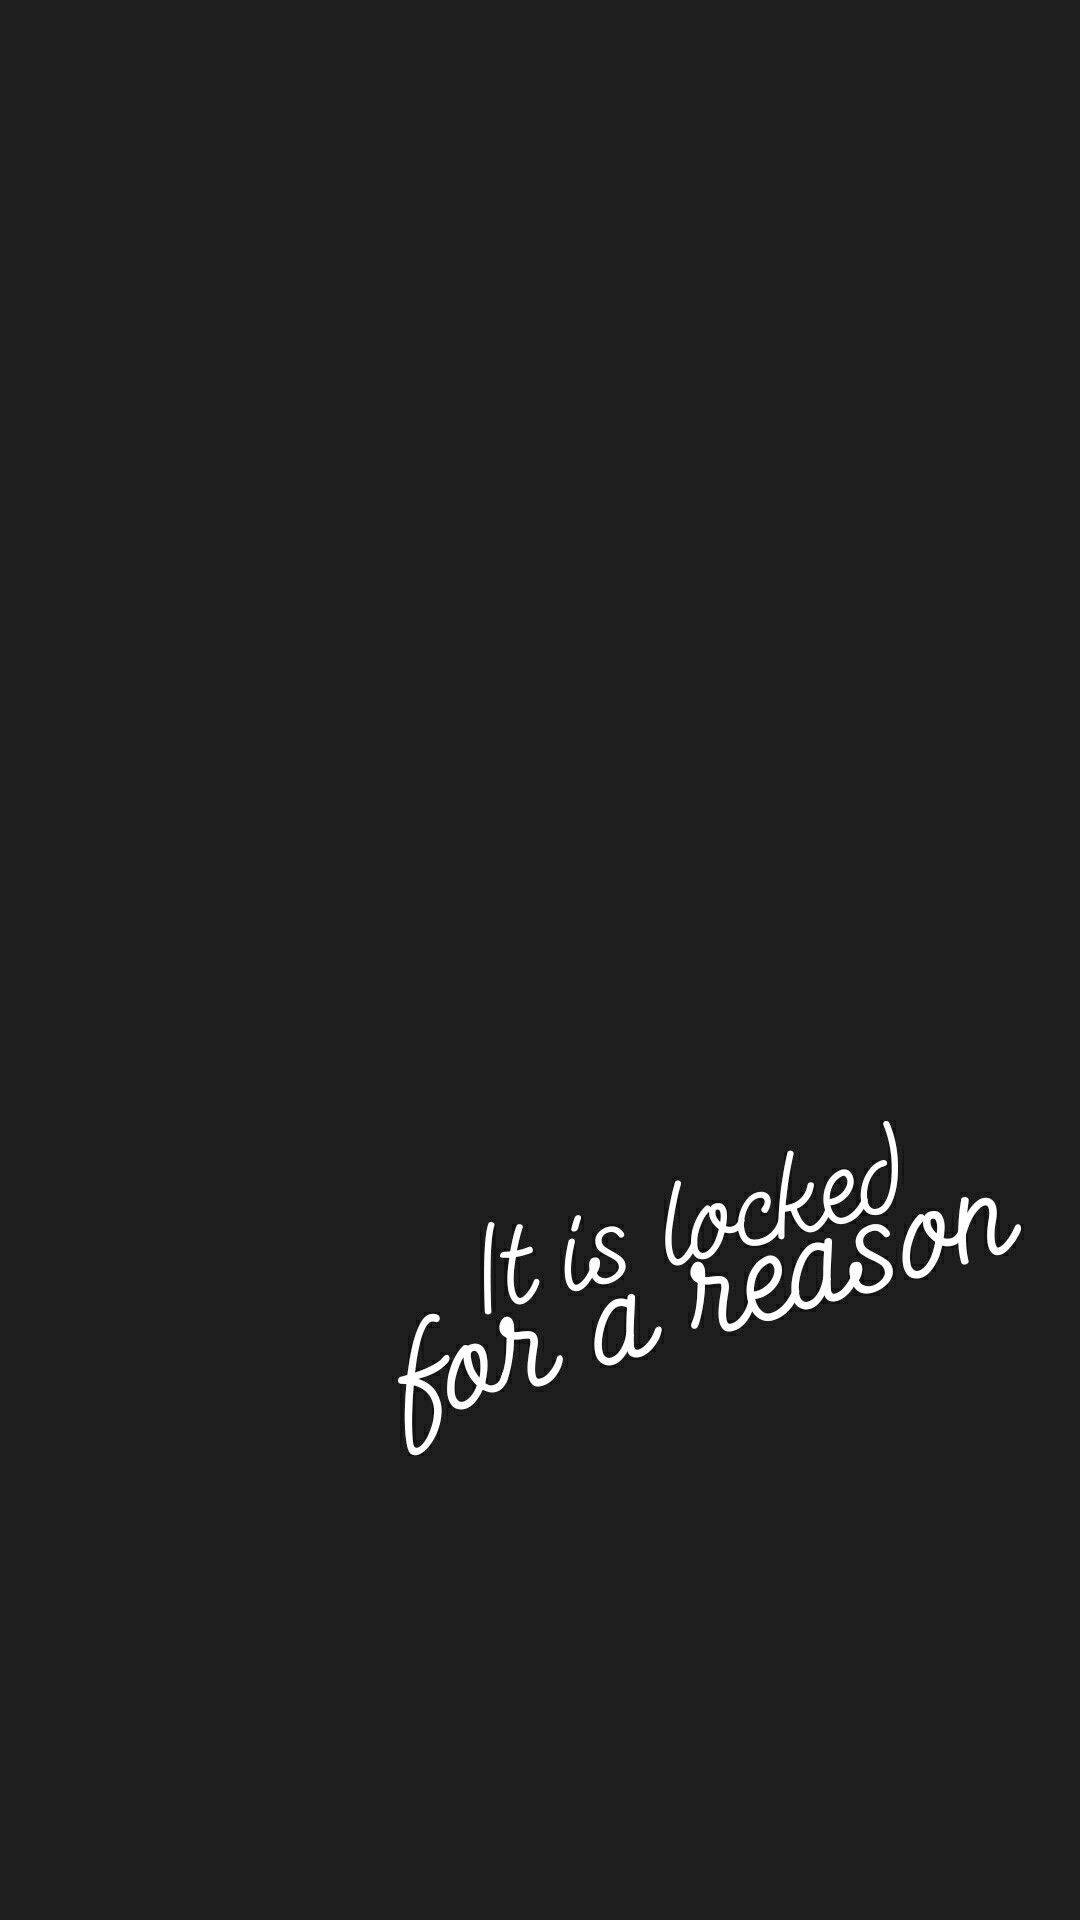 It Is Locked For A Reason Indie Phone Wallpaper